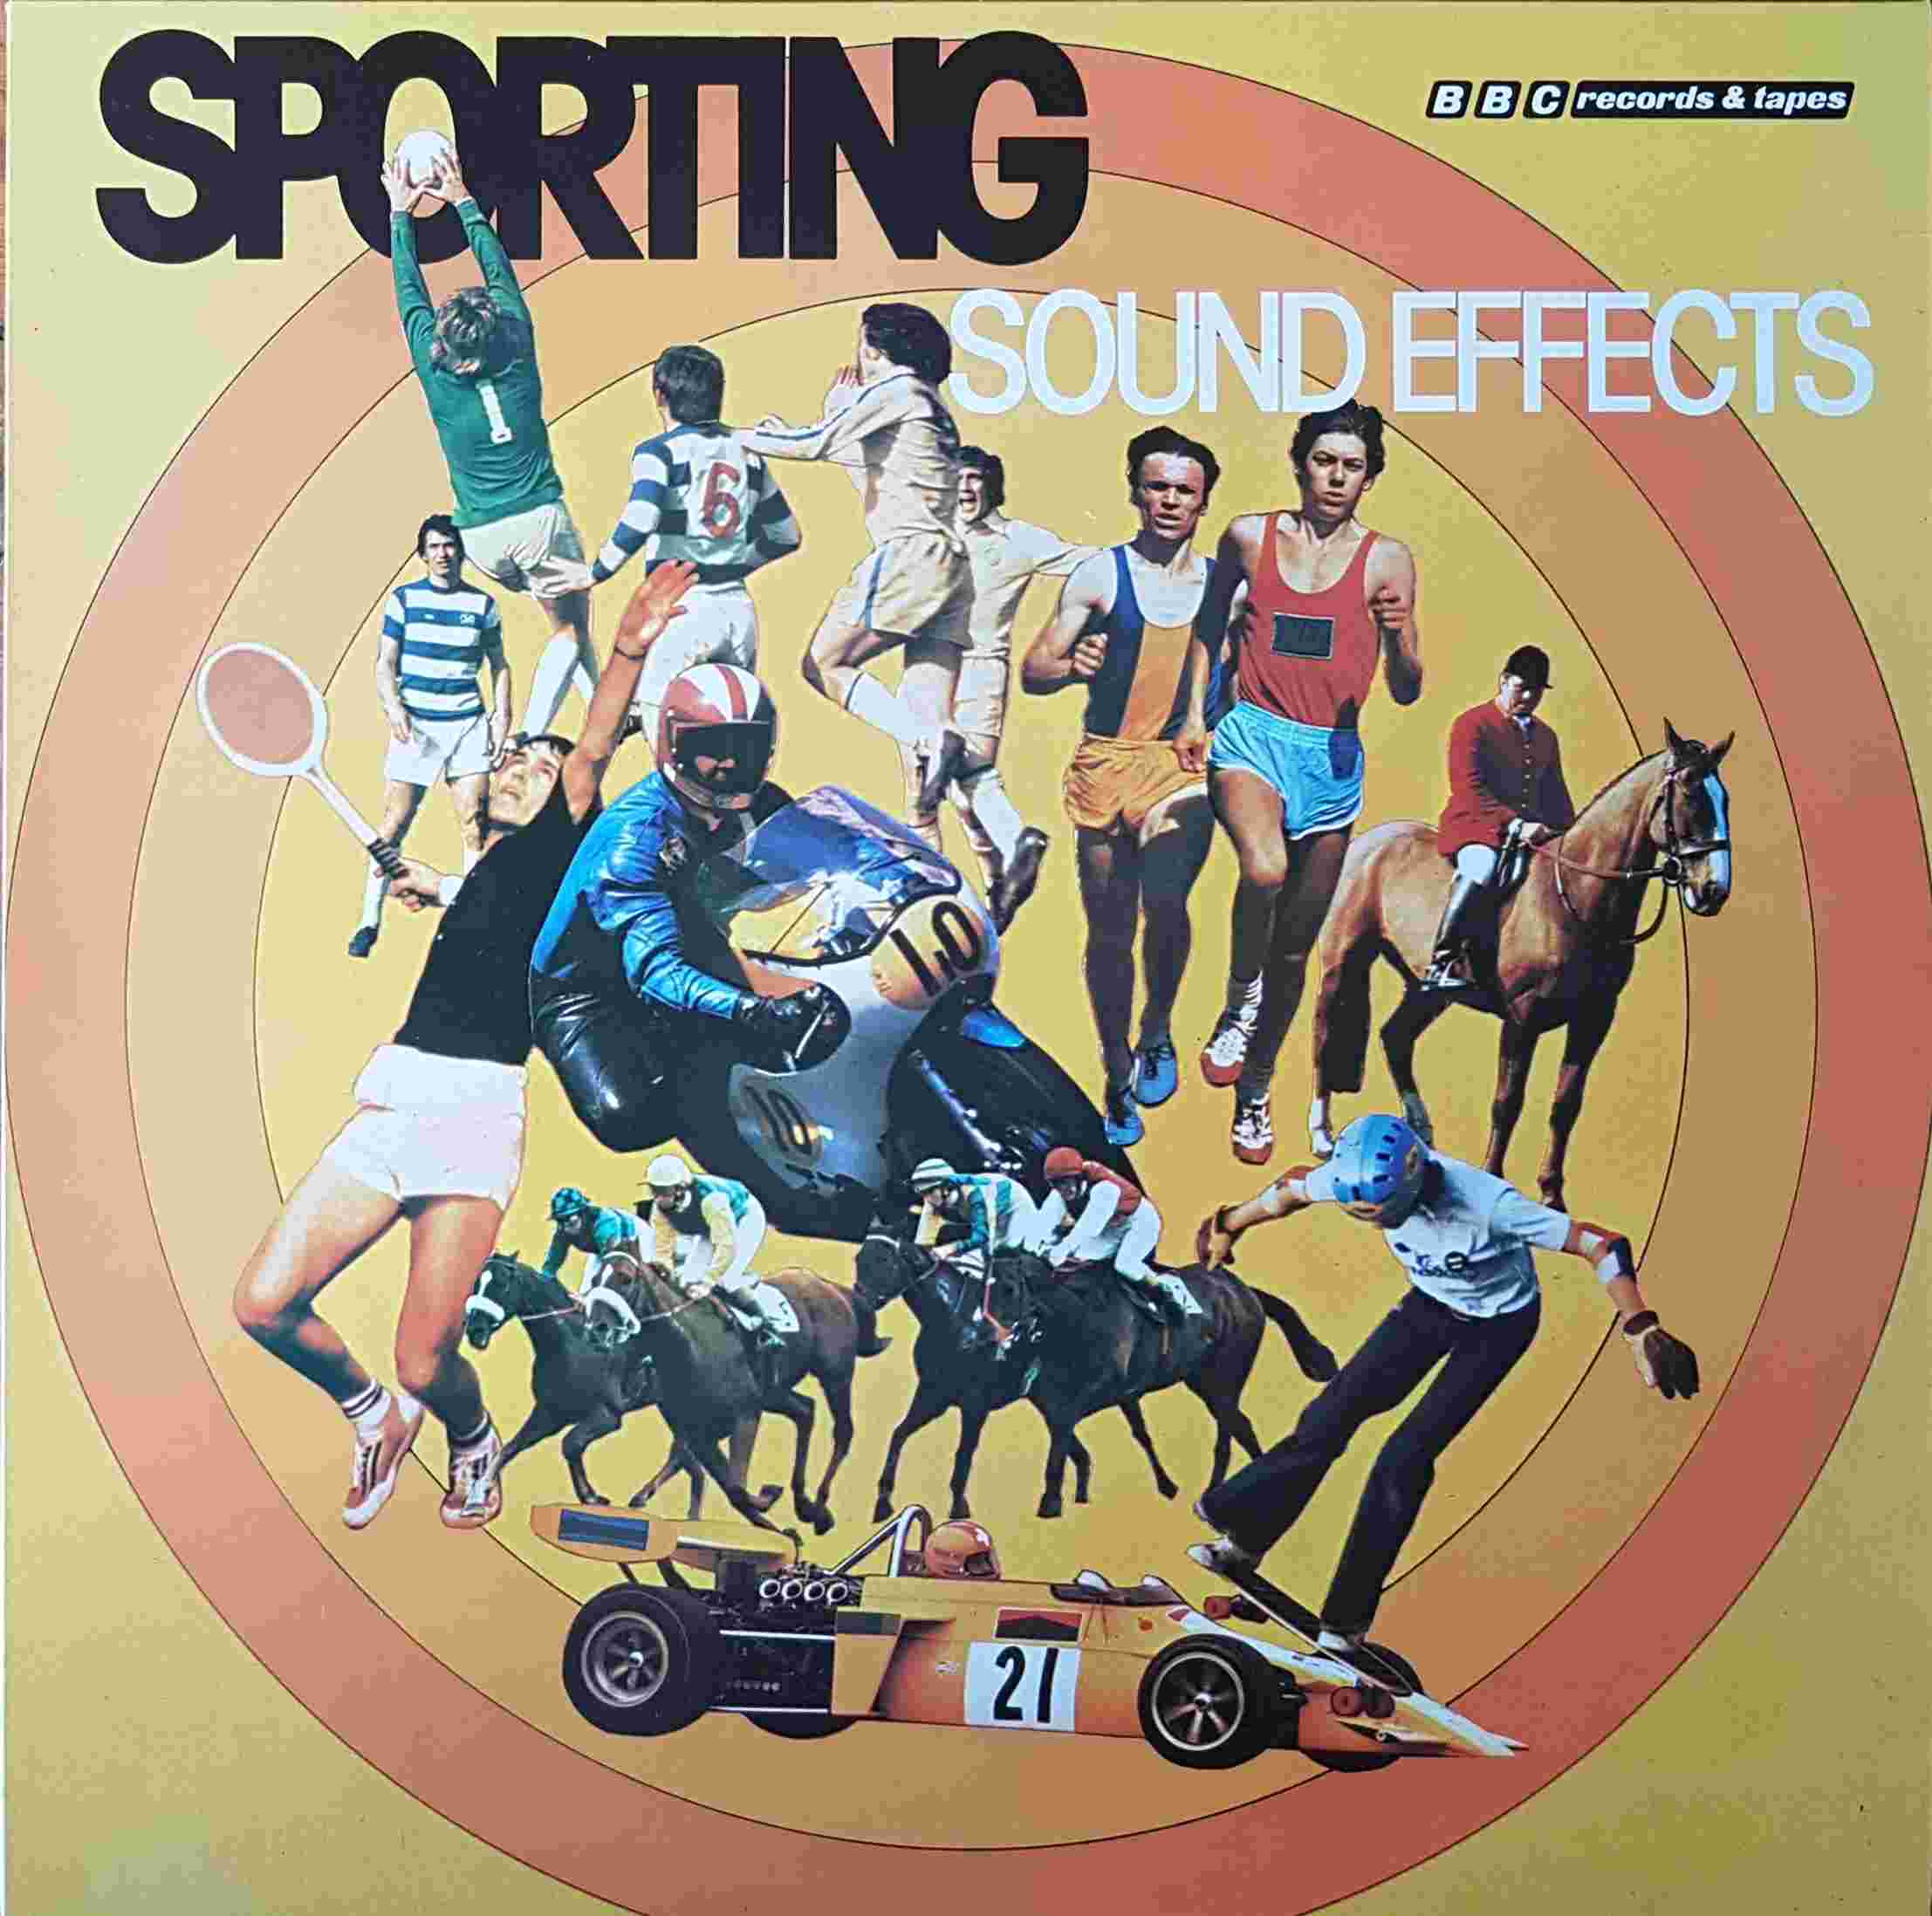 Picture of REC 322 Sporting sound effects (Sound effects no. 20) by artist Various from the BBC albums - Records and Tapes library